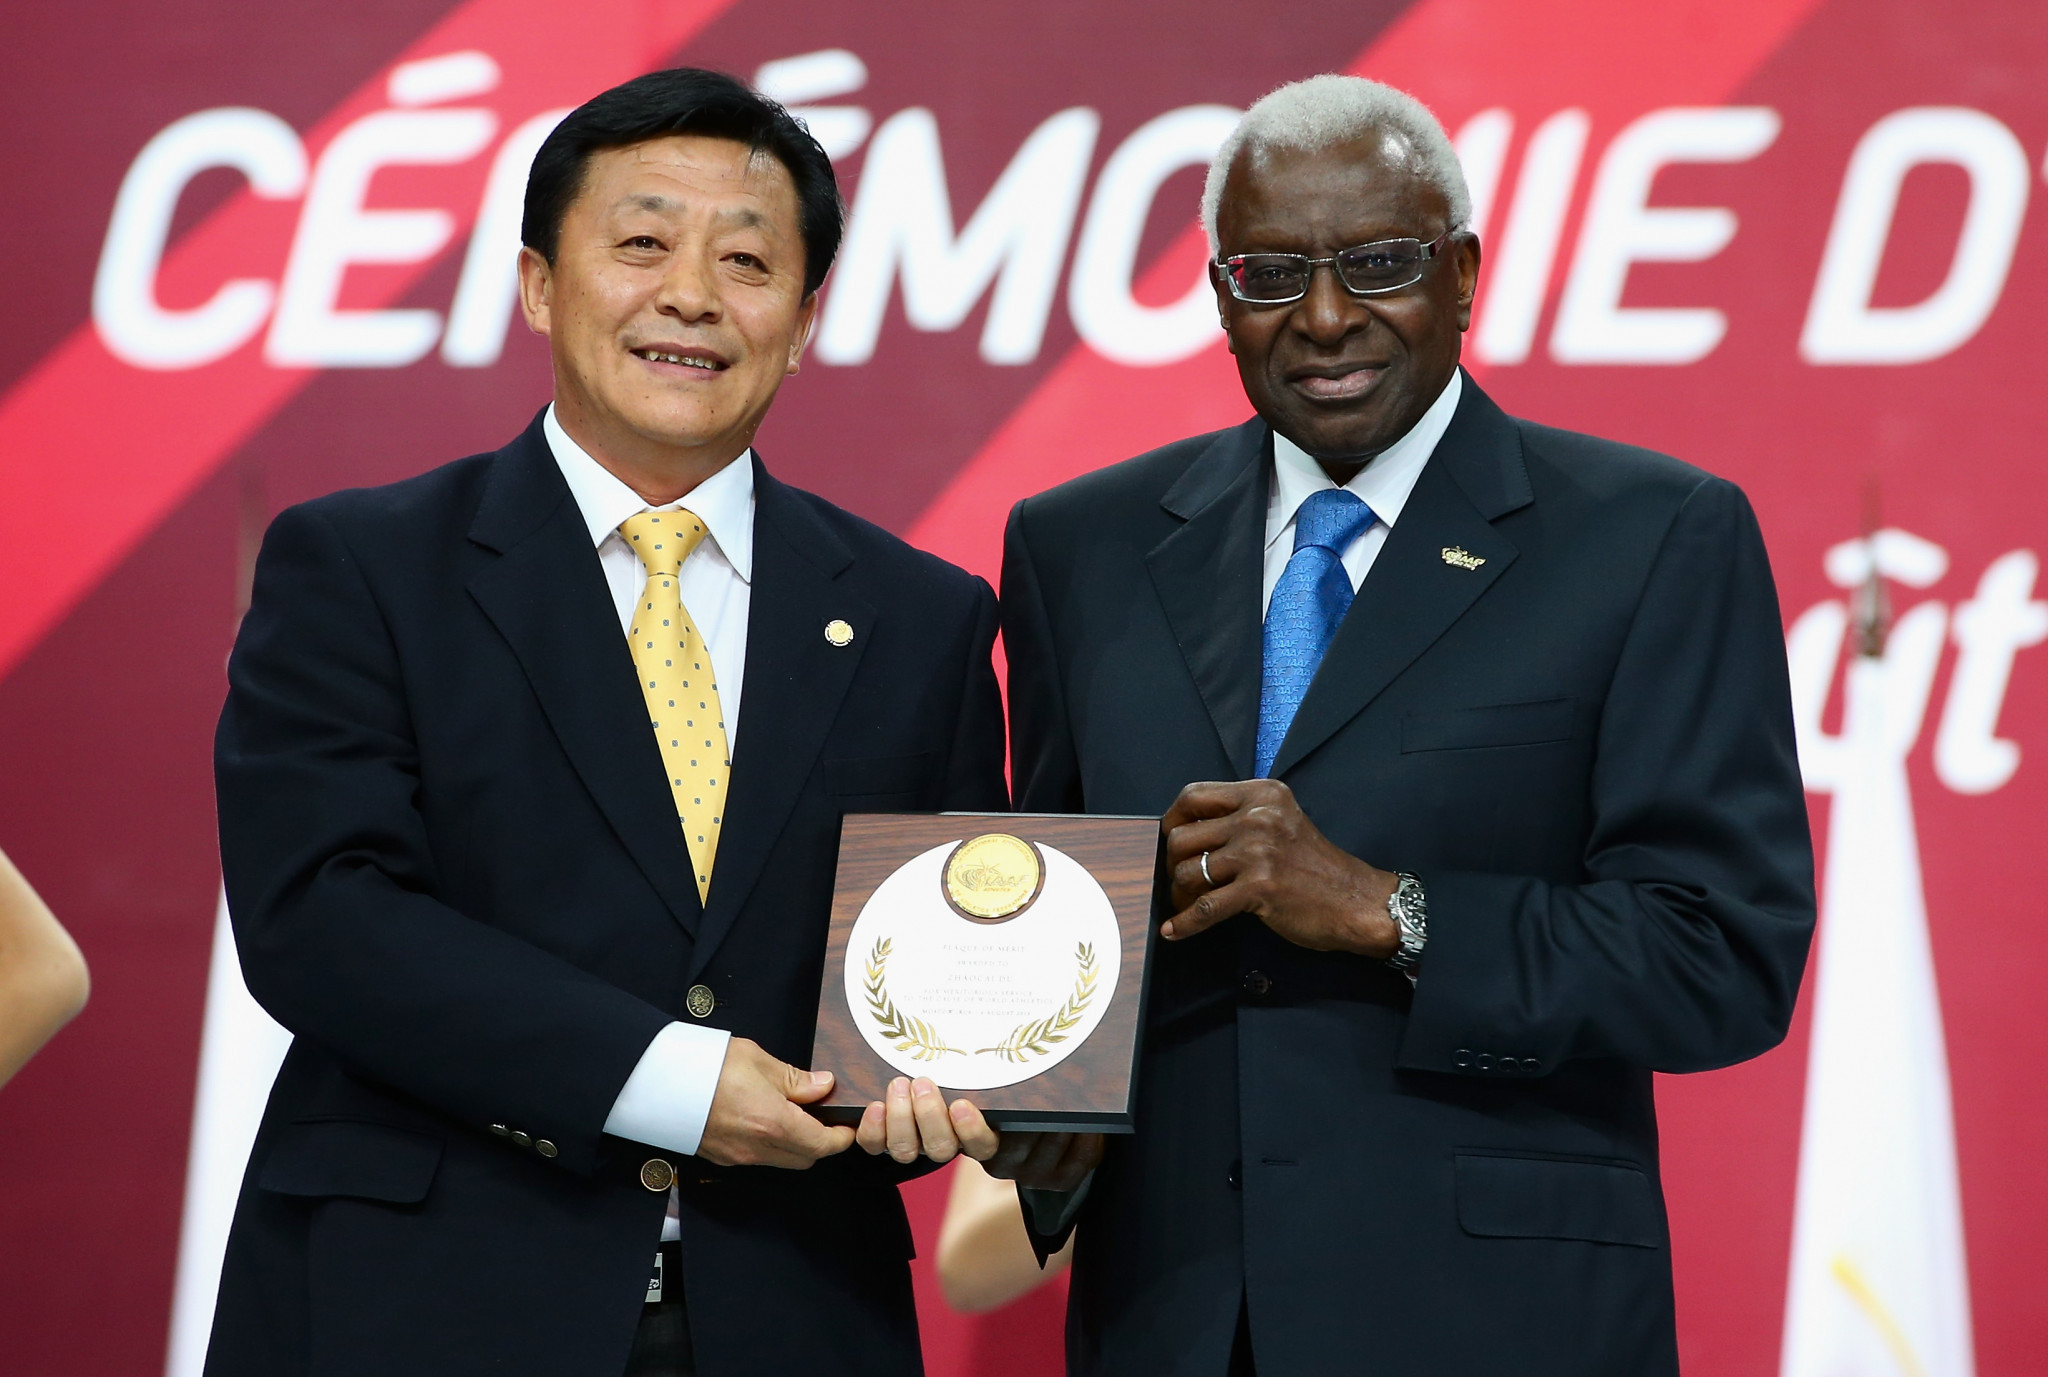 
Du Zhaocai, left, was a member of the IAAF Council under its late President Lamine Diack, right, later convicted of corruption ©Getty Images

